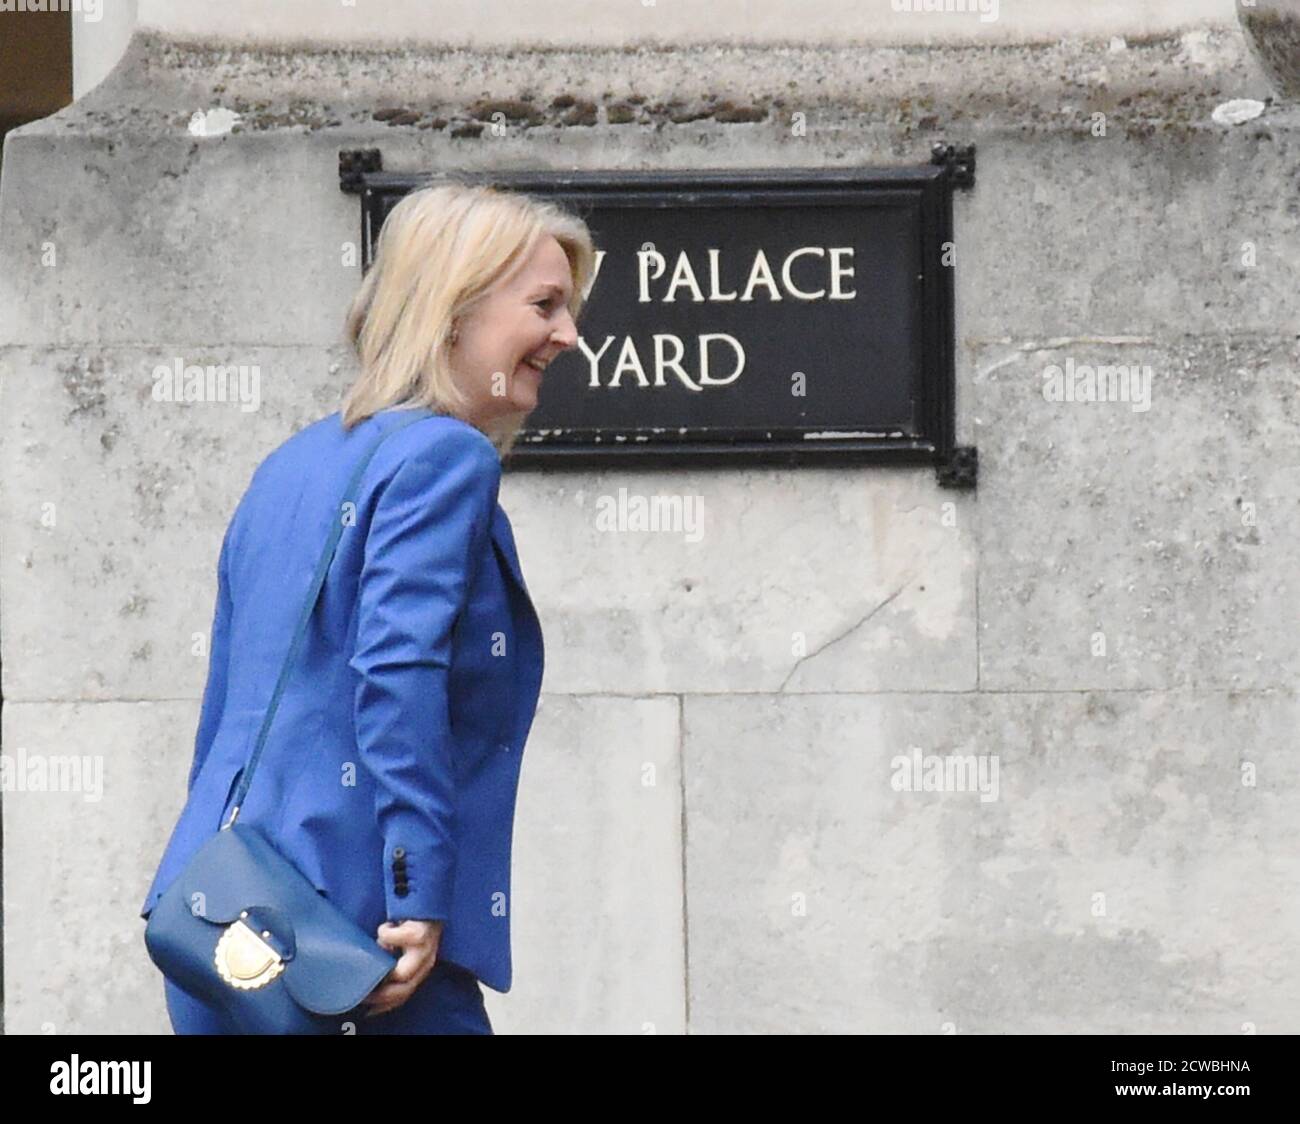 Photograph of Liz Truss. Elizabeth Mary Truss (1975-) a British politician serving as Secretary of State for International Trade and President of the Board of Trade since July 2019 and Minister for Women and Equalities since September 2019. Stock Photo